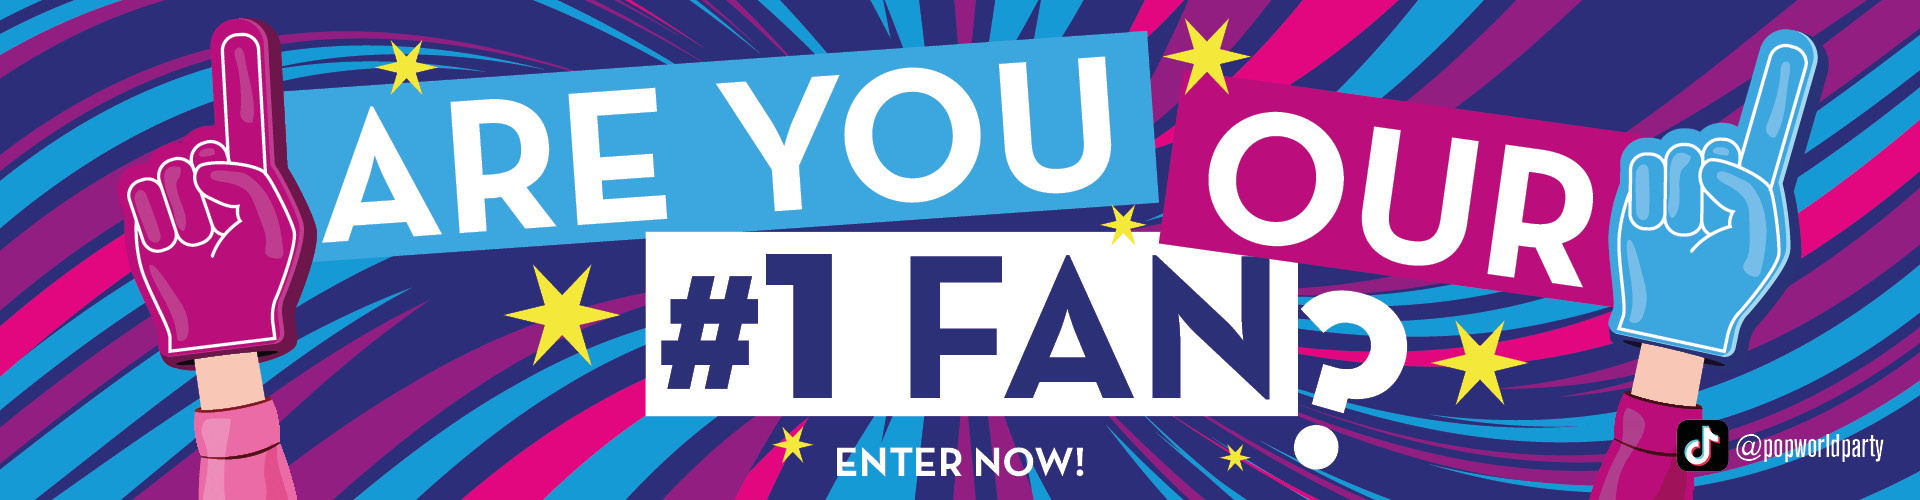 Are you Popworld's Number 1 fan?